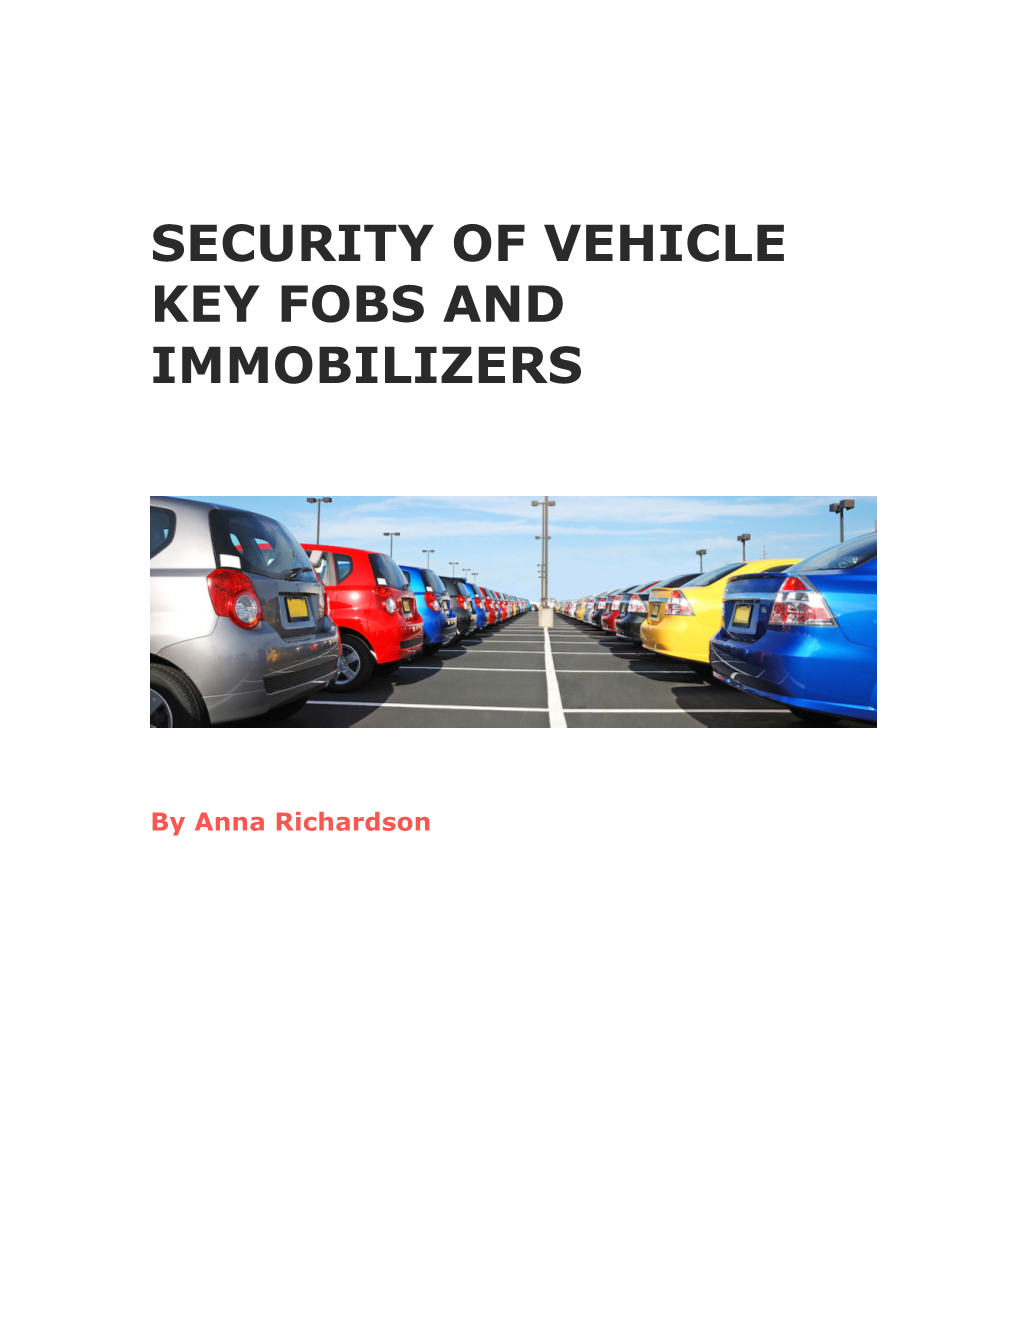 Security of Vehicle Key Fobs and Immobilizers